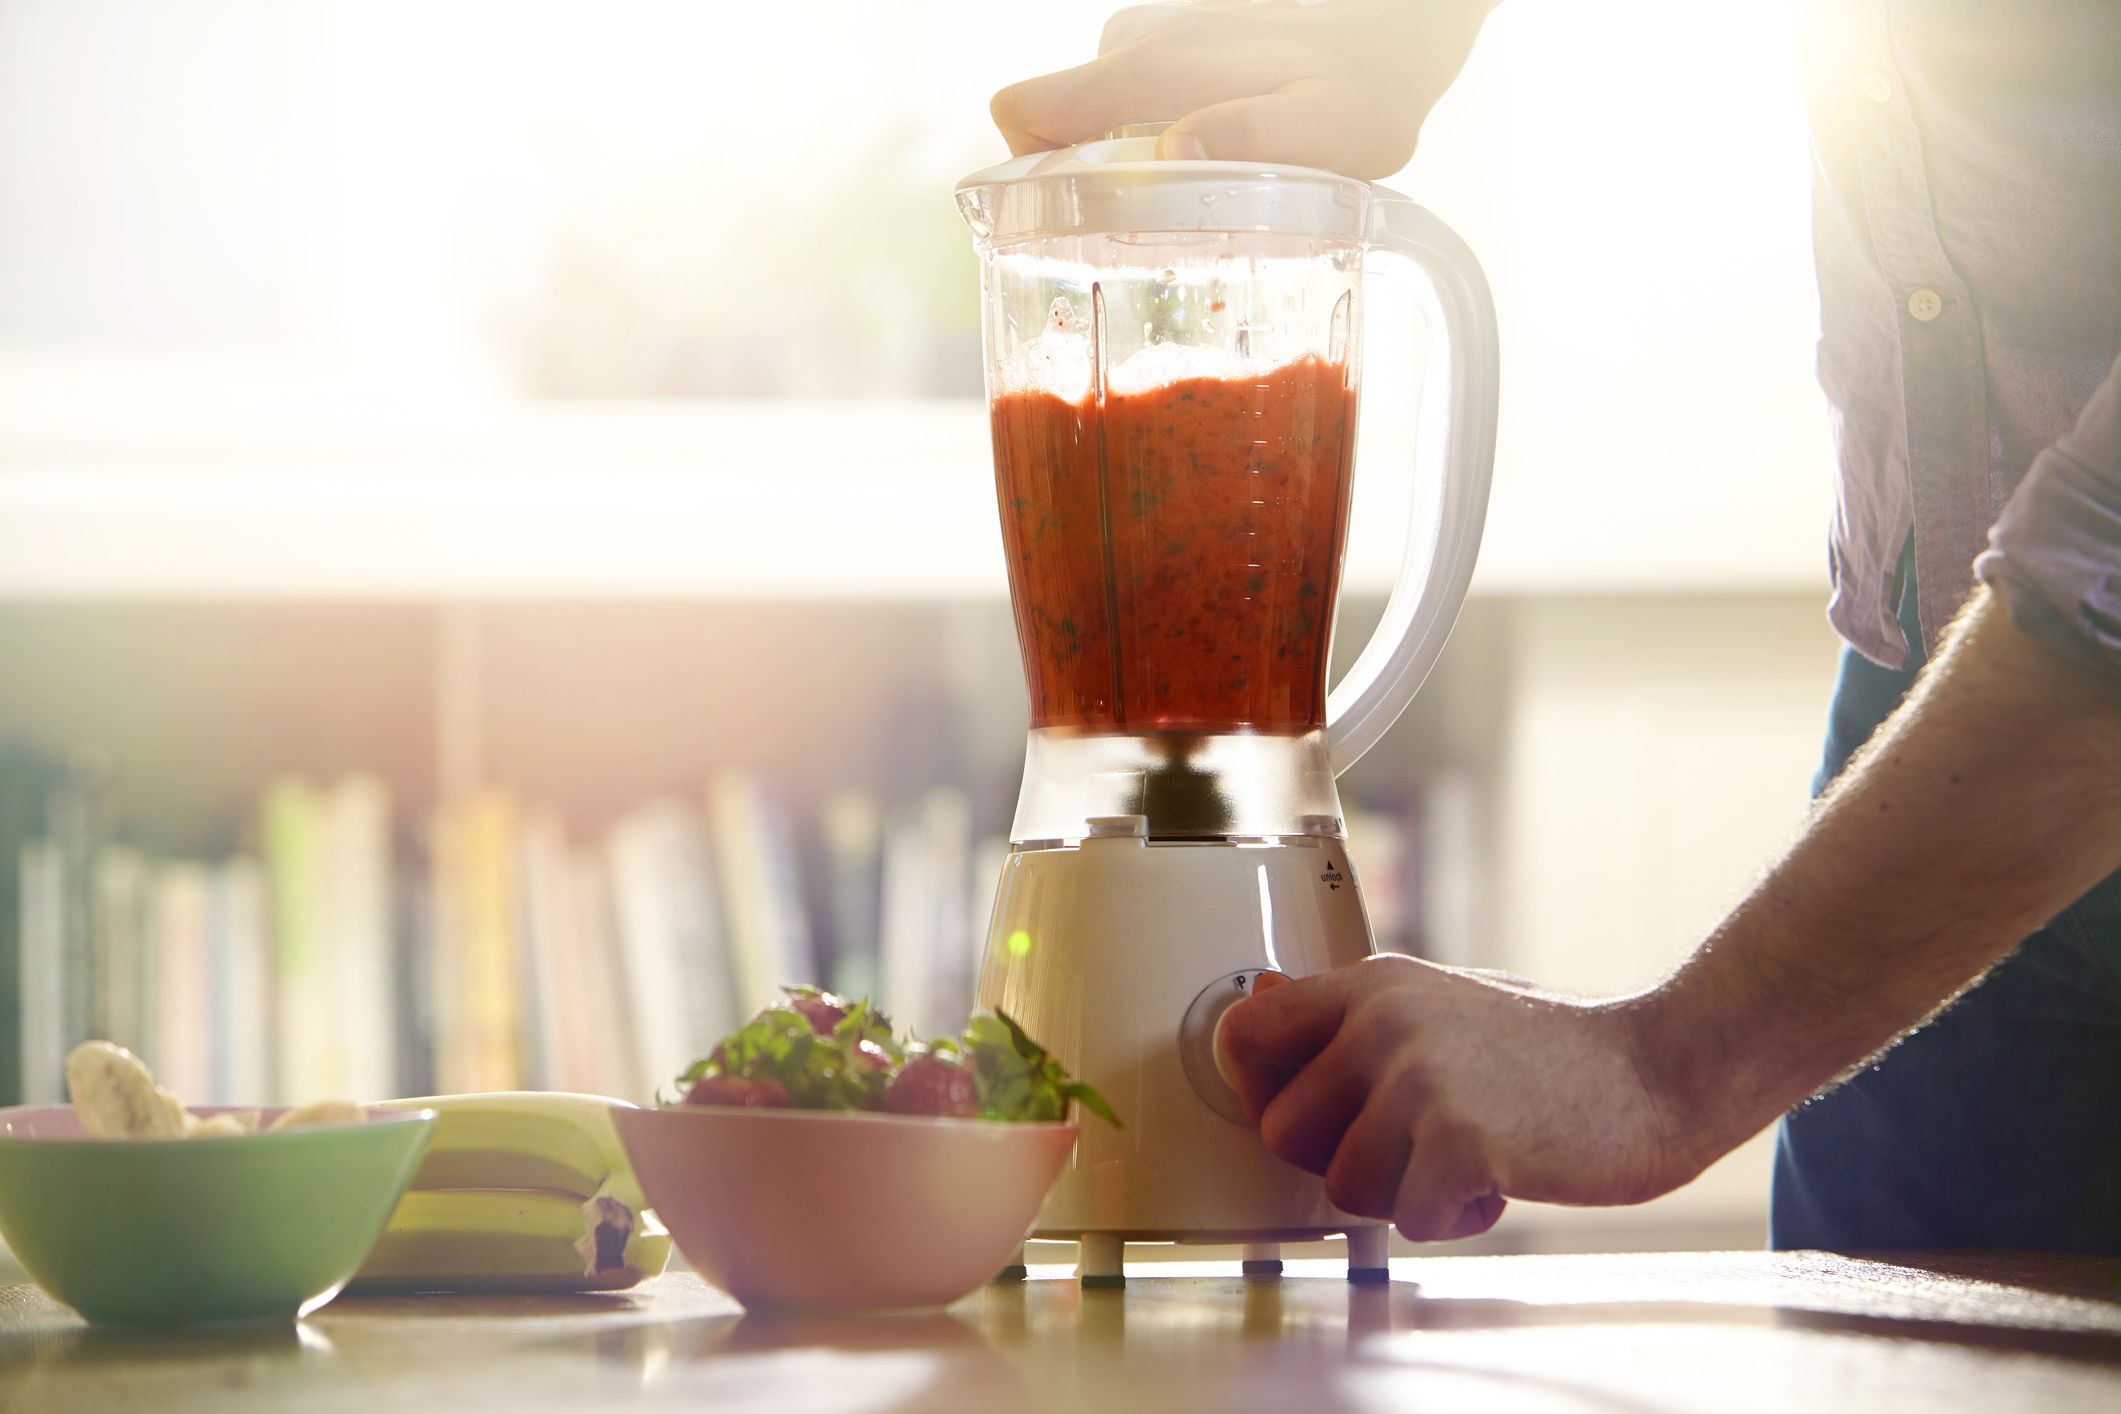 12 Ways to Use Your Blender You Didn't Think Of